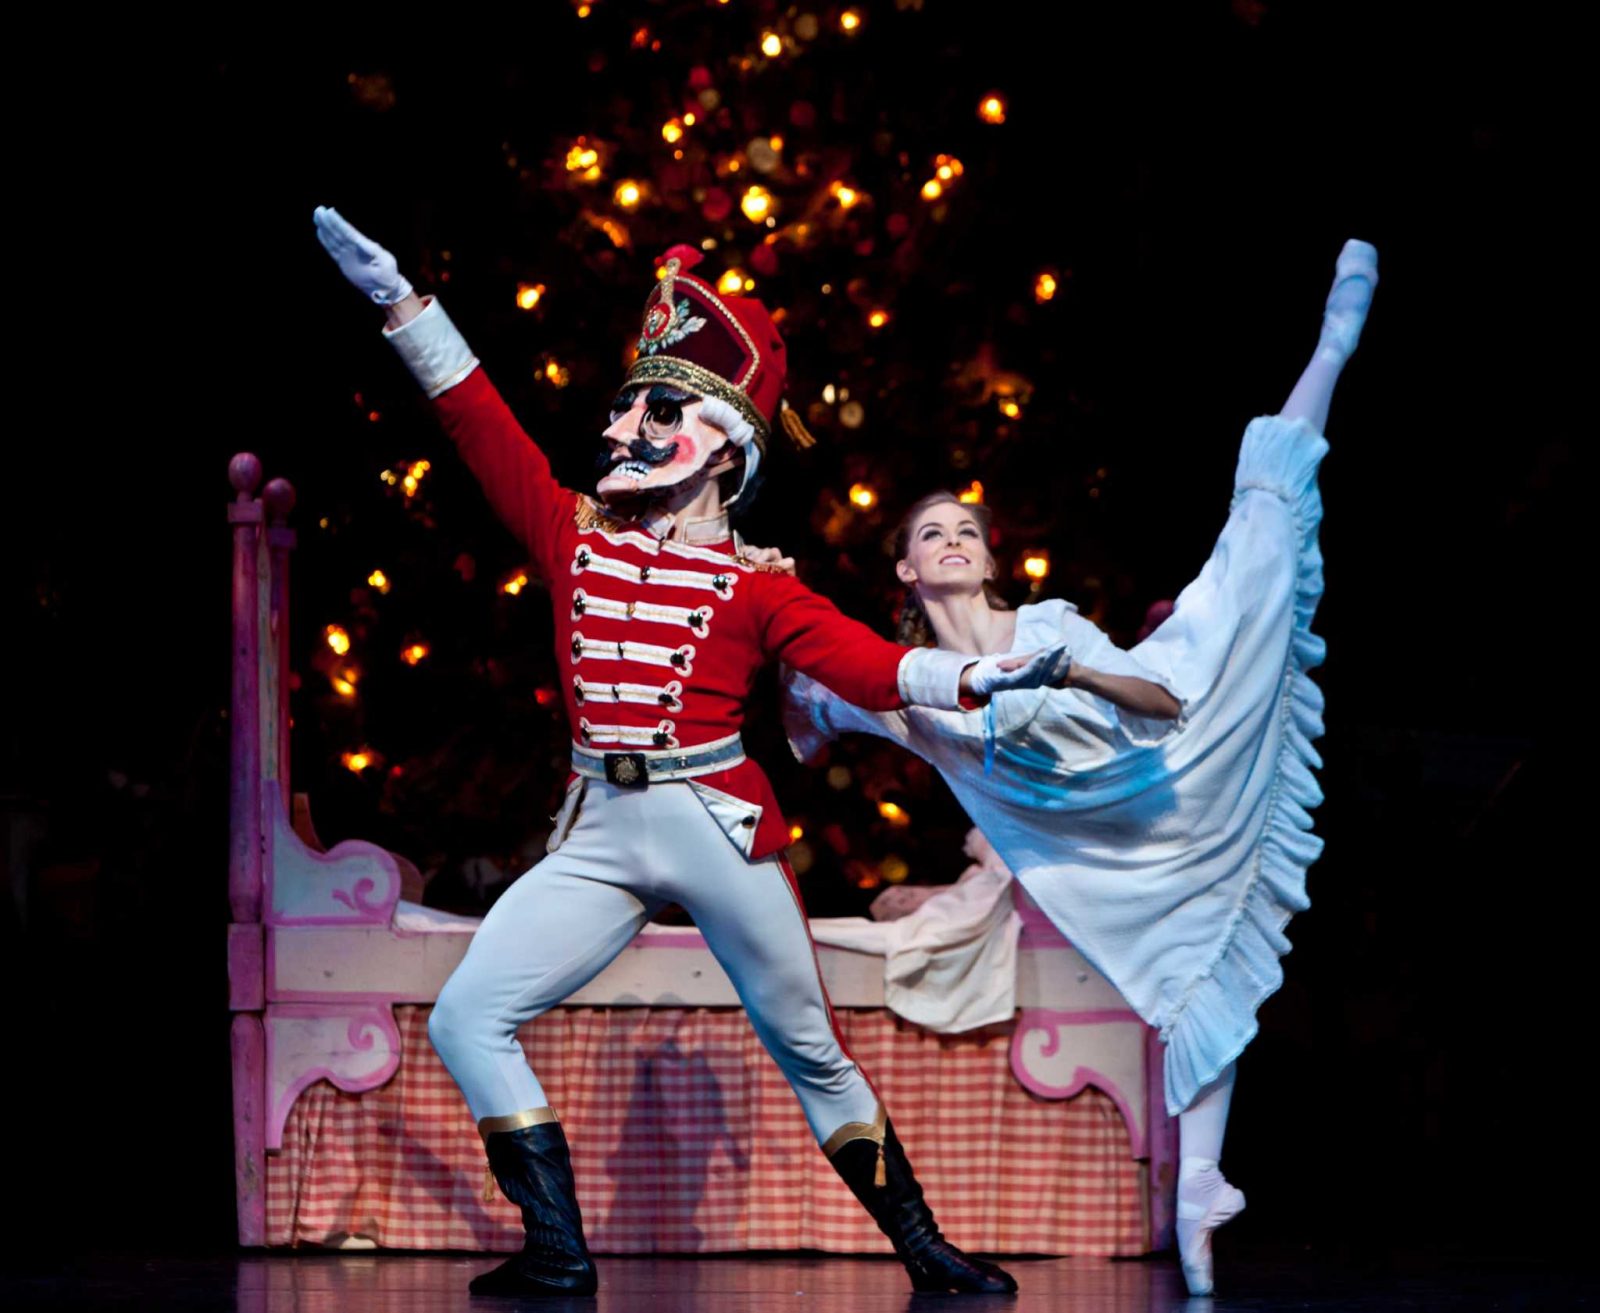 The Hardest Trivia Quiz You’ll Ever Take (Unless You Take the Easy Way Out) The Nutcracker ballet